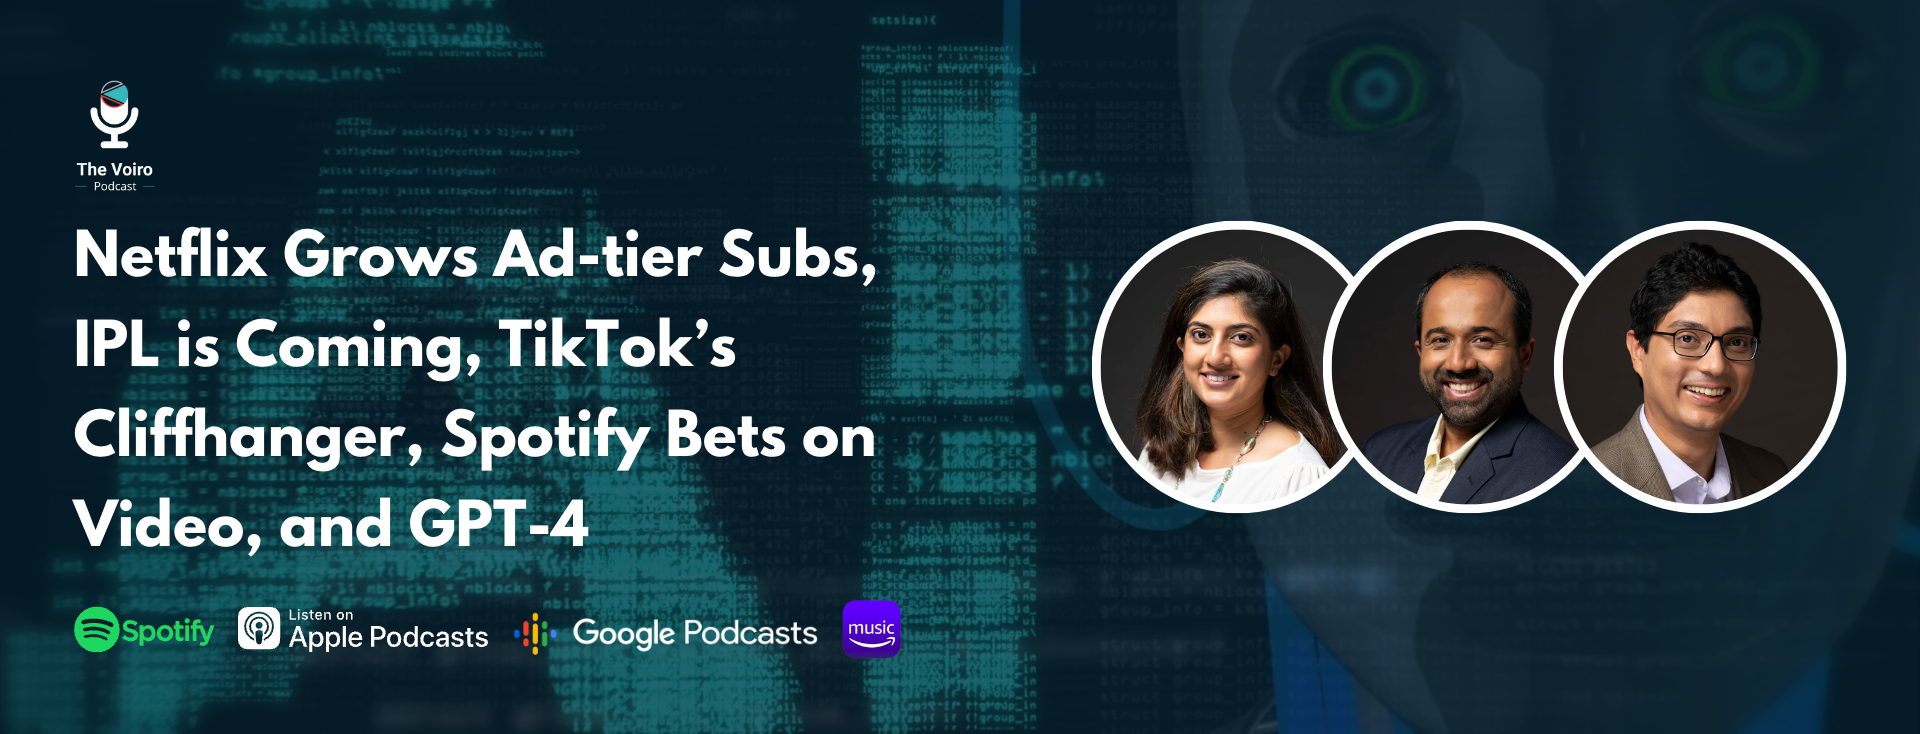 Netflix Grows Ad-tier Subs, IPL is Coming, TikTok’s Cliffhanger, Spotify Bets on Video, and GPT-4